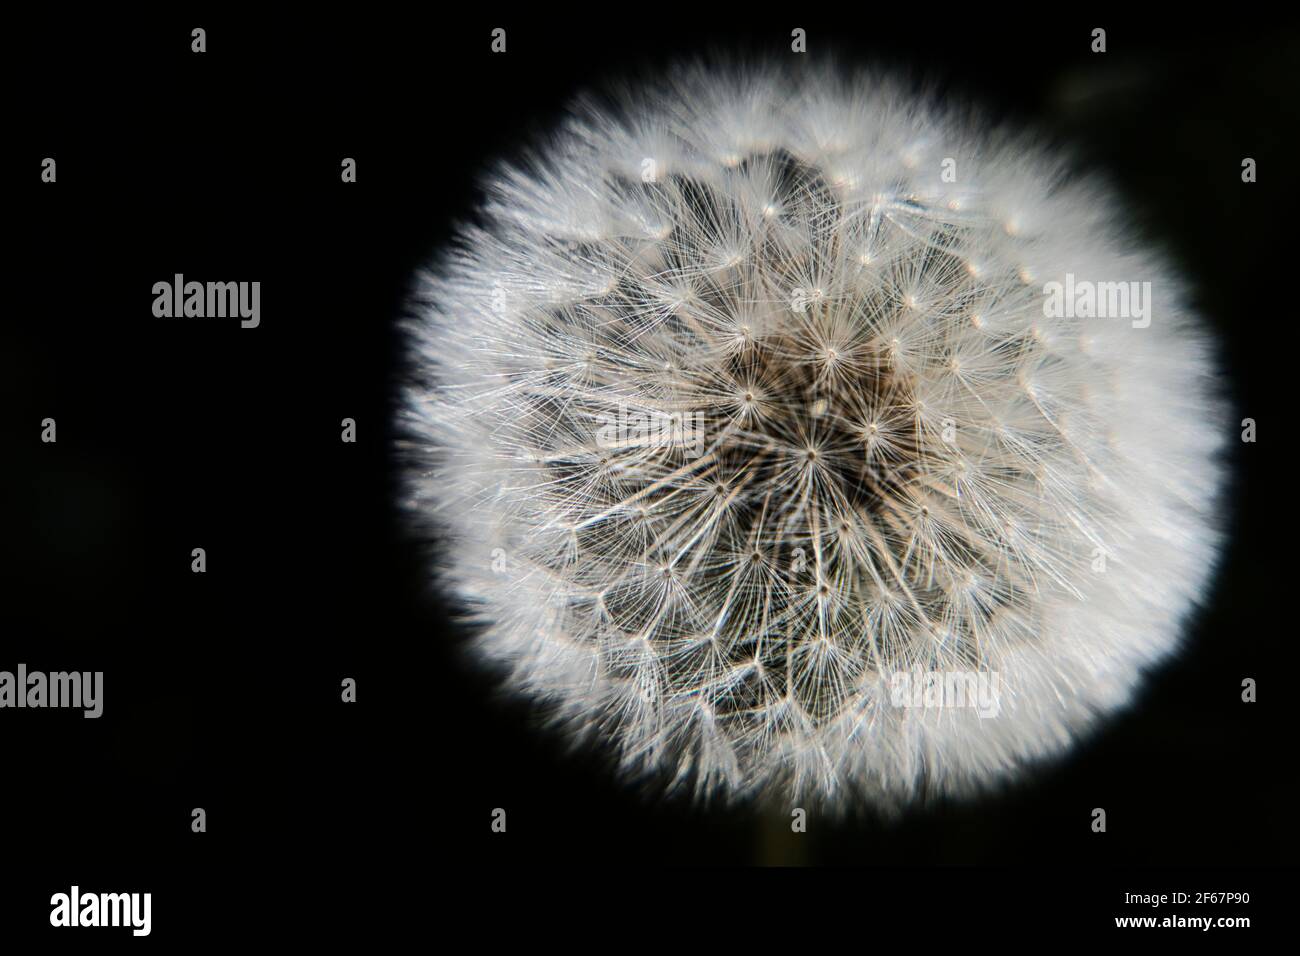 Close up of a dandelion seedhead Banque D'Images